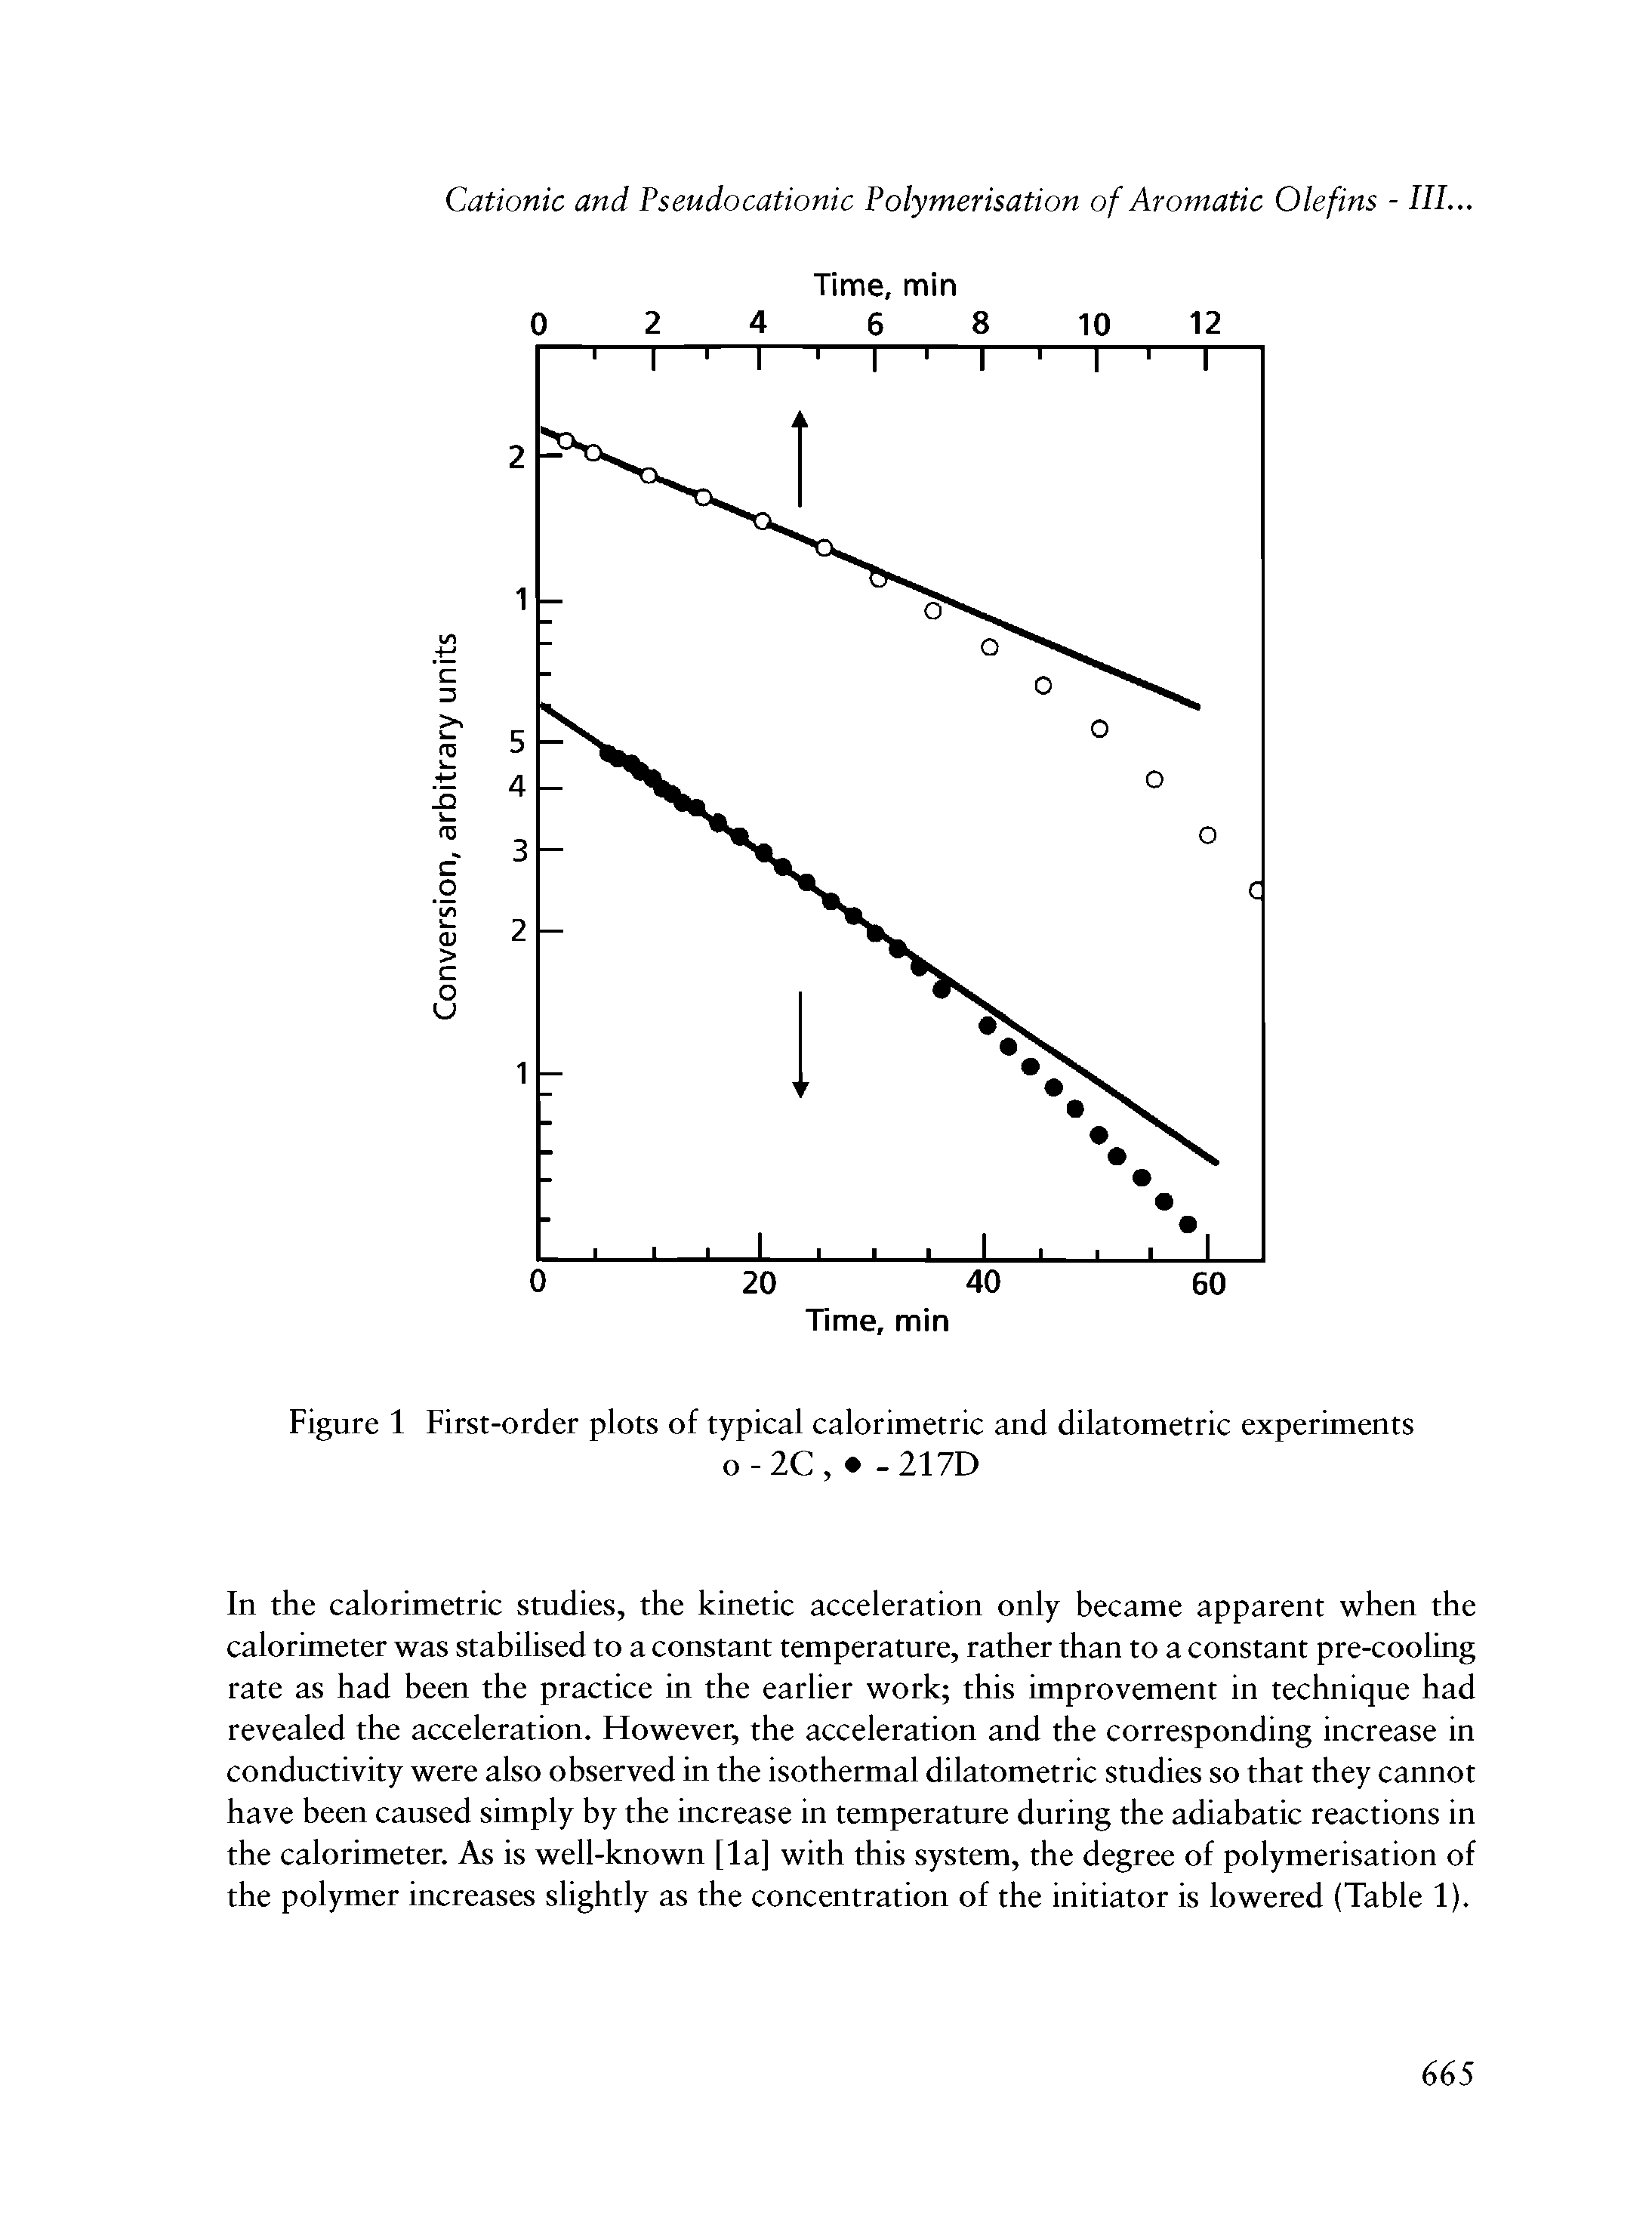 Figure 1 First-order plots of typical calorimetric and dilatometric experiments...